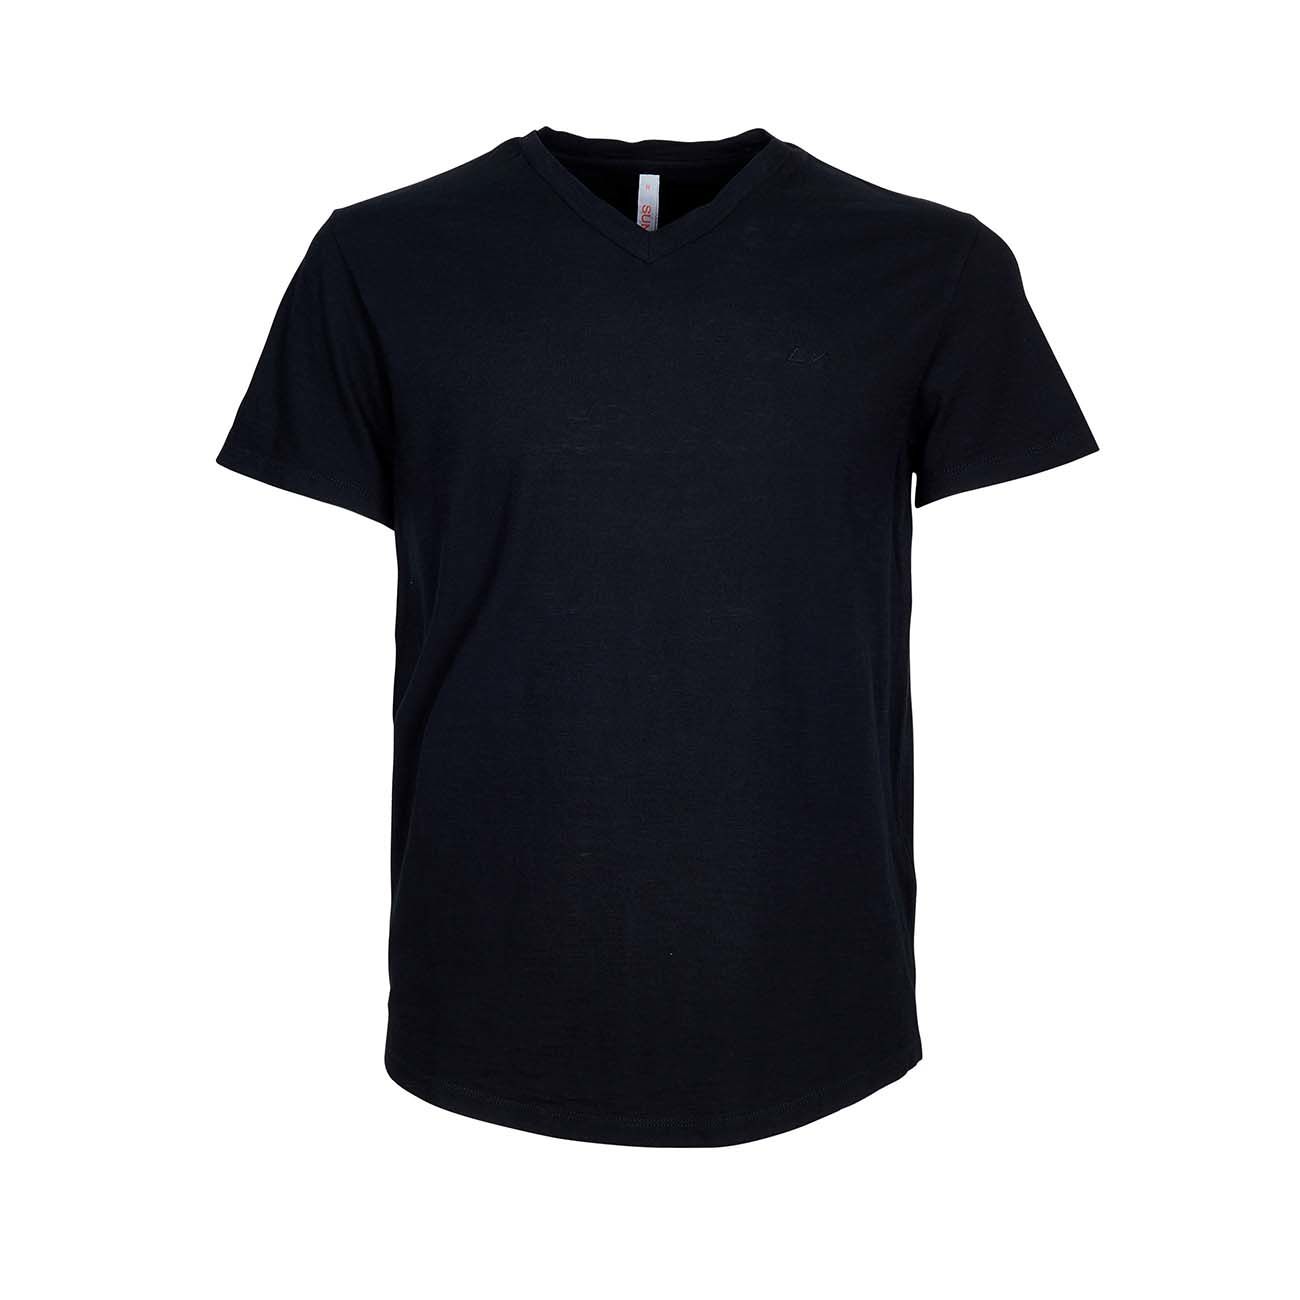 V-NECK T-SHIRT AND ROUNDED BOTTOM Man Inchiostro 2006025493603